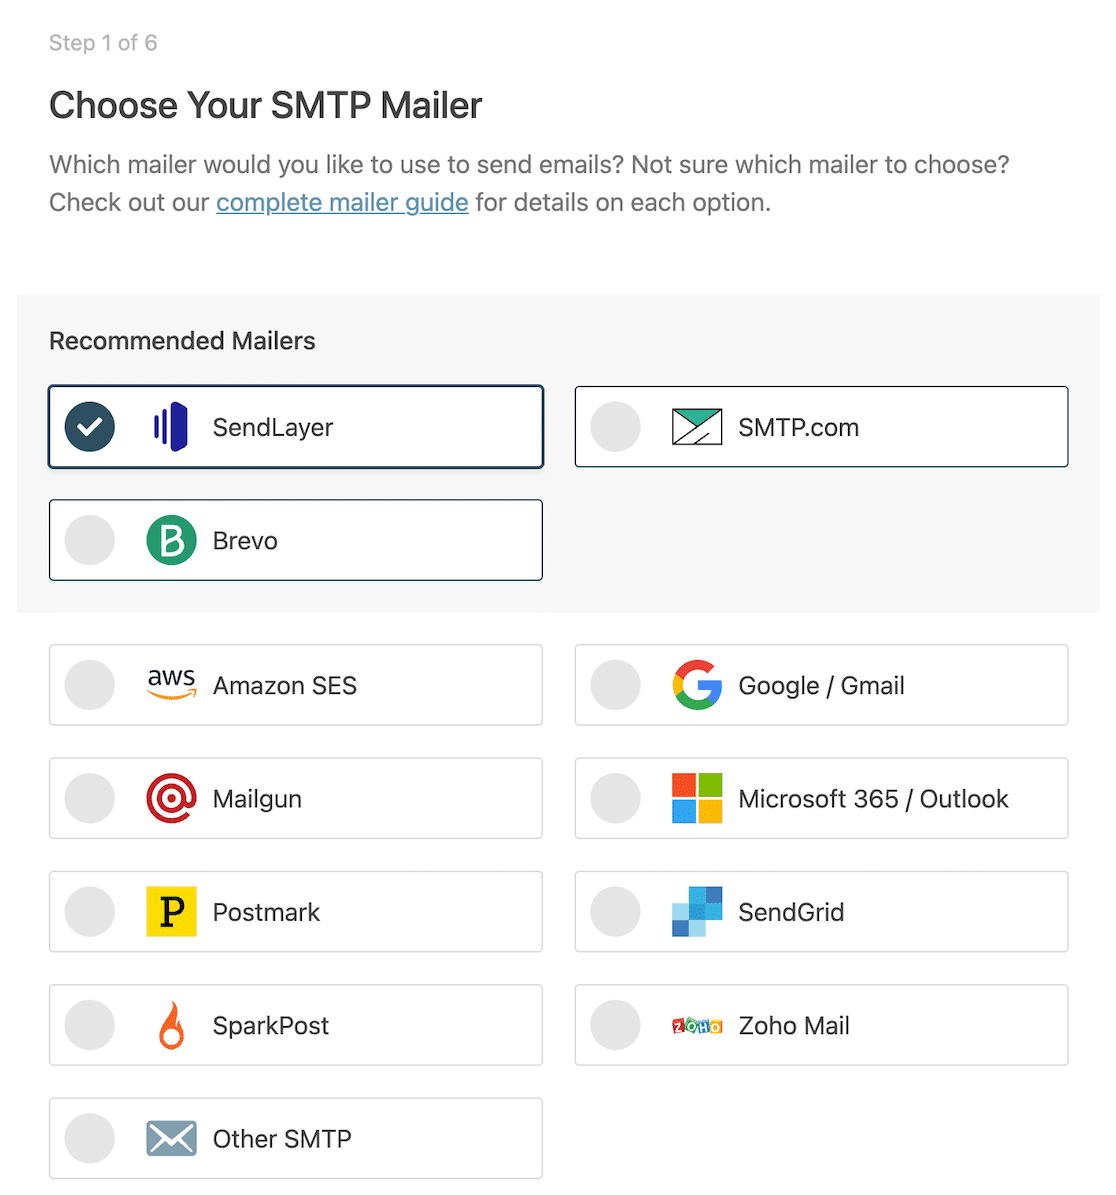 Select your SMTP mailer